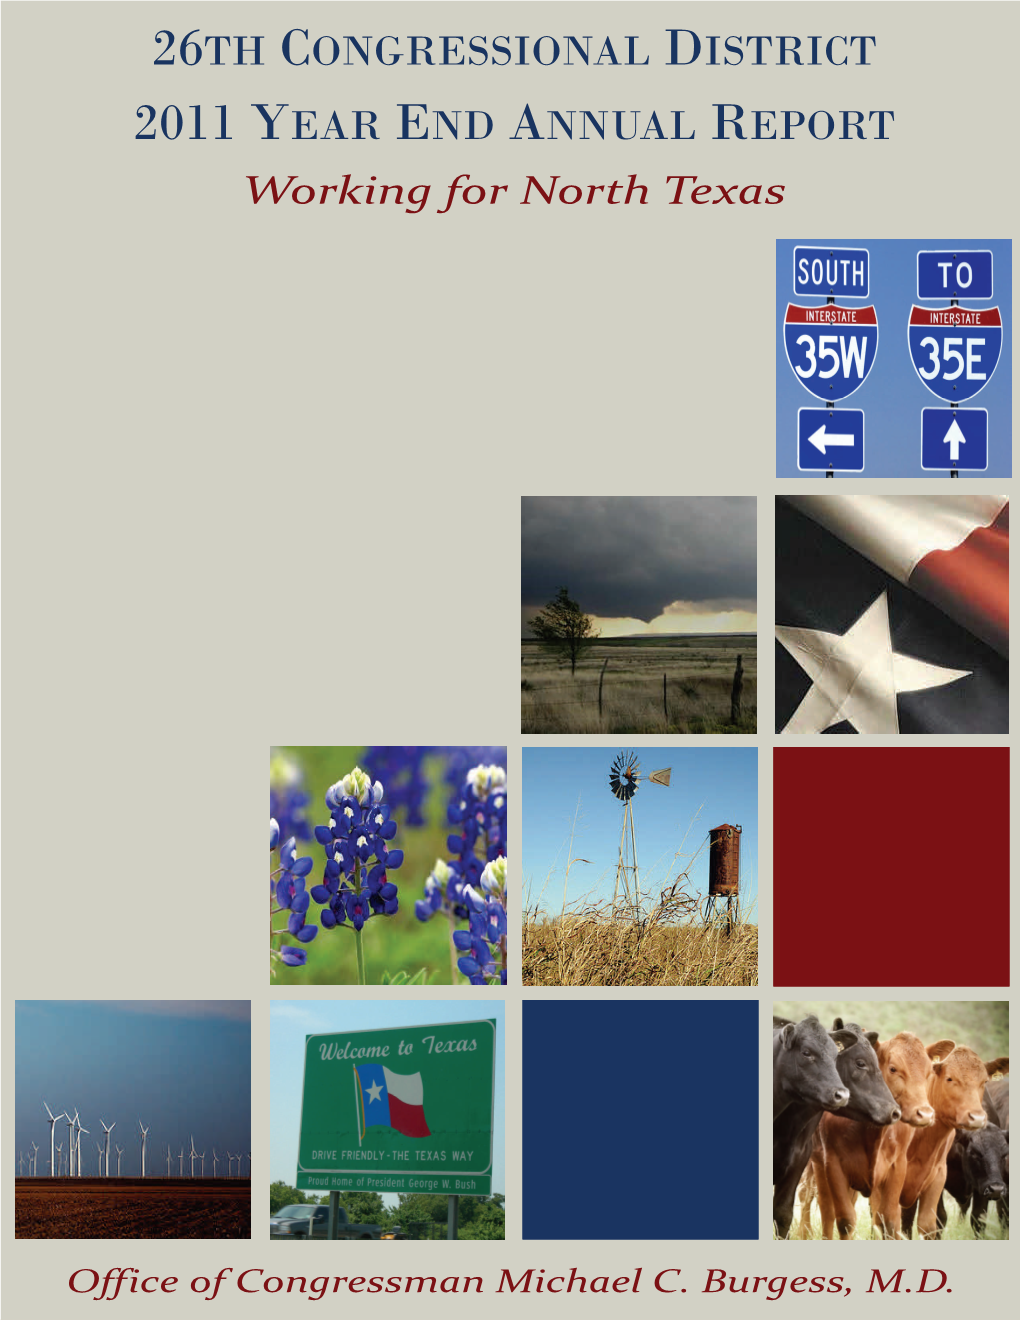 2011 YEAR END ANNUAL REPORT Working for North Texas